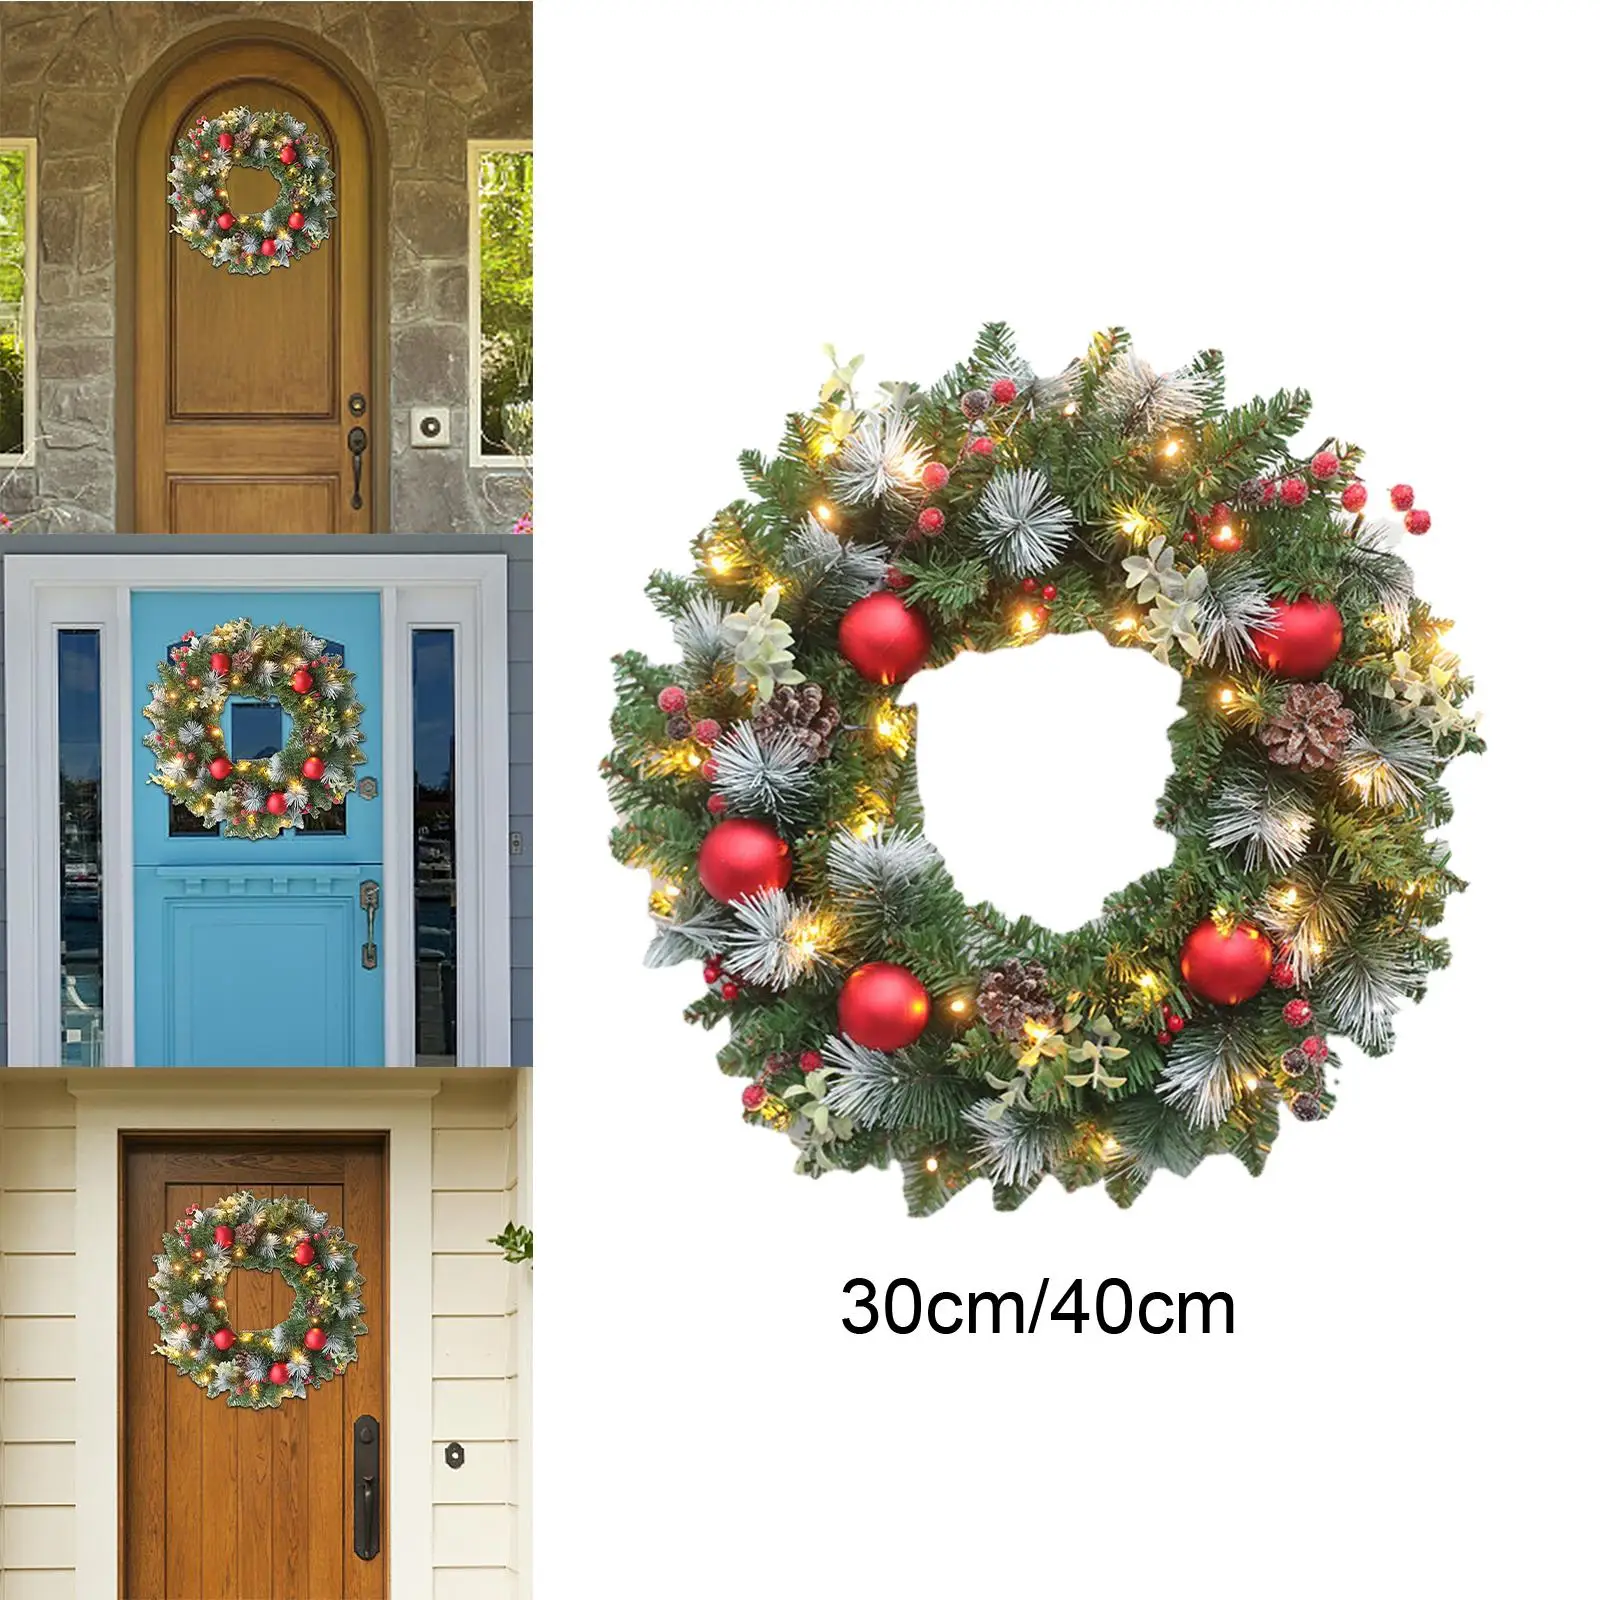 LED Christmas Wreath Hanging Garland Christmas Party Supplies with Cones for Windows Winter Outside decor